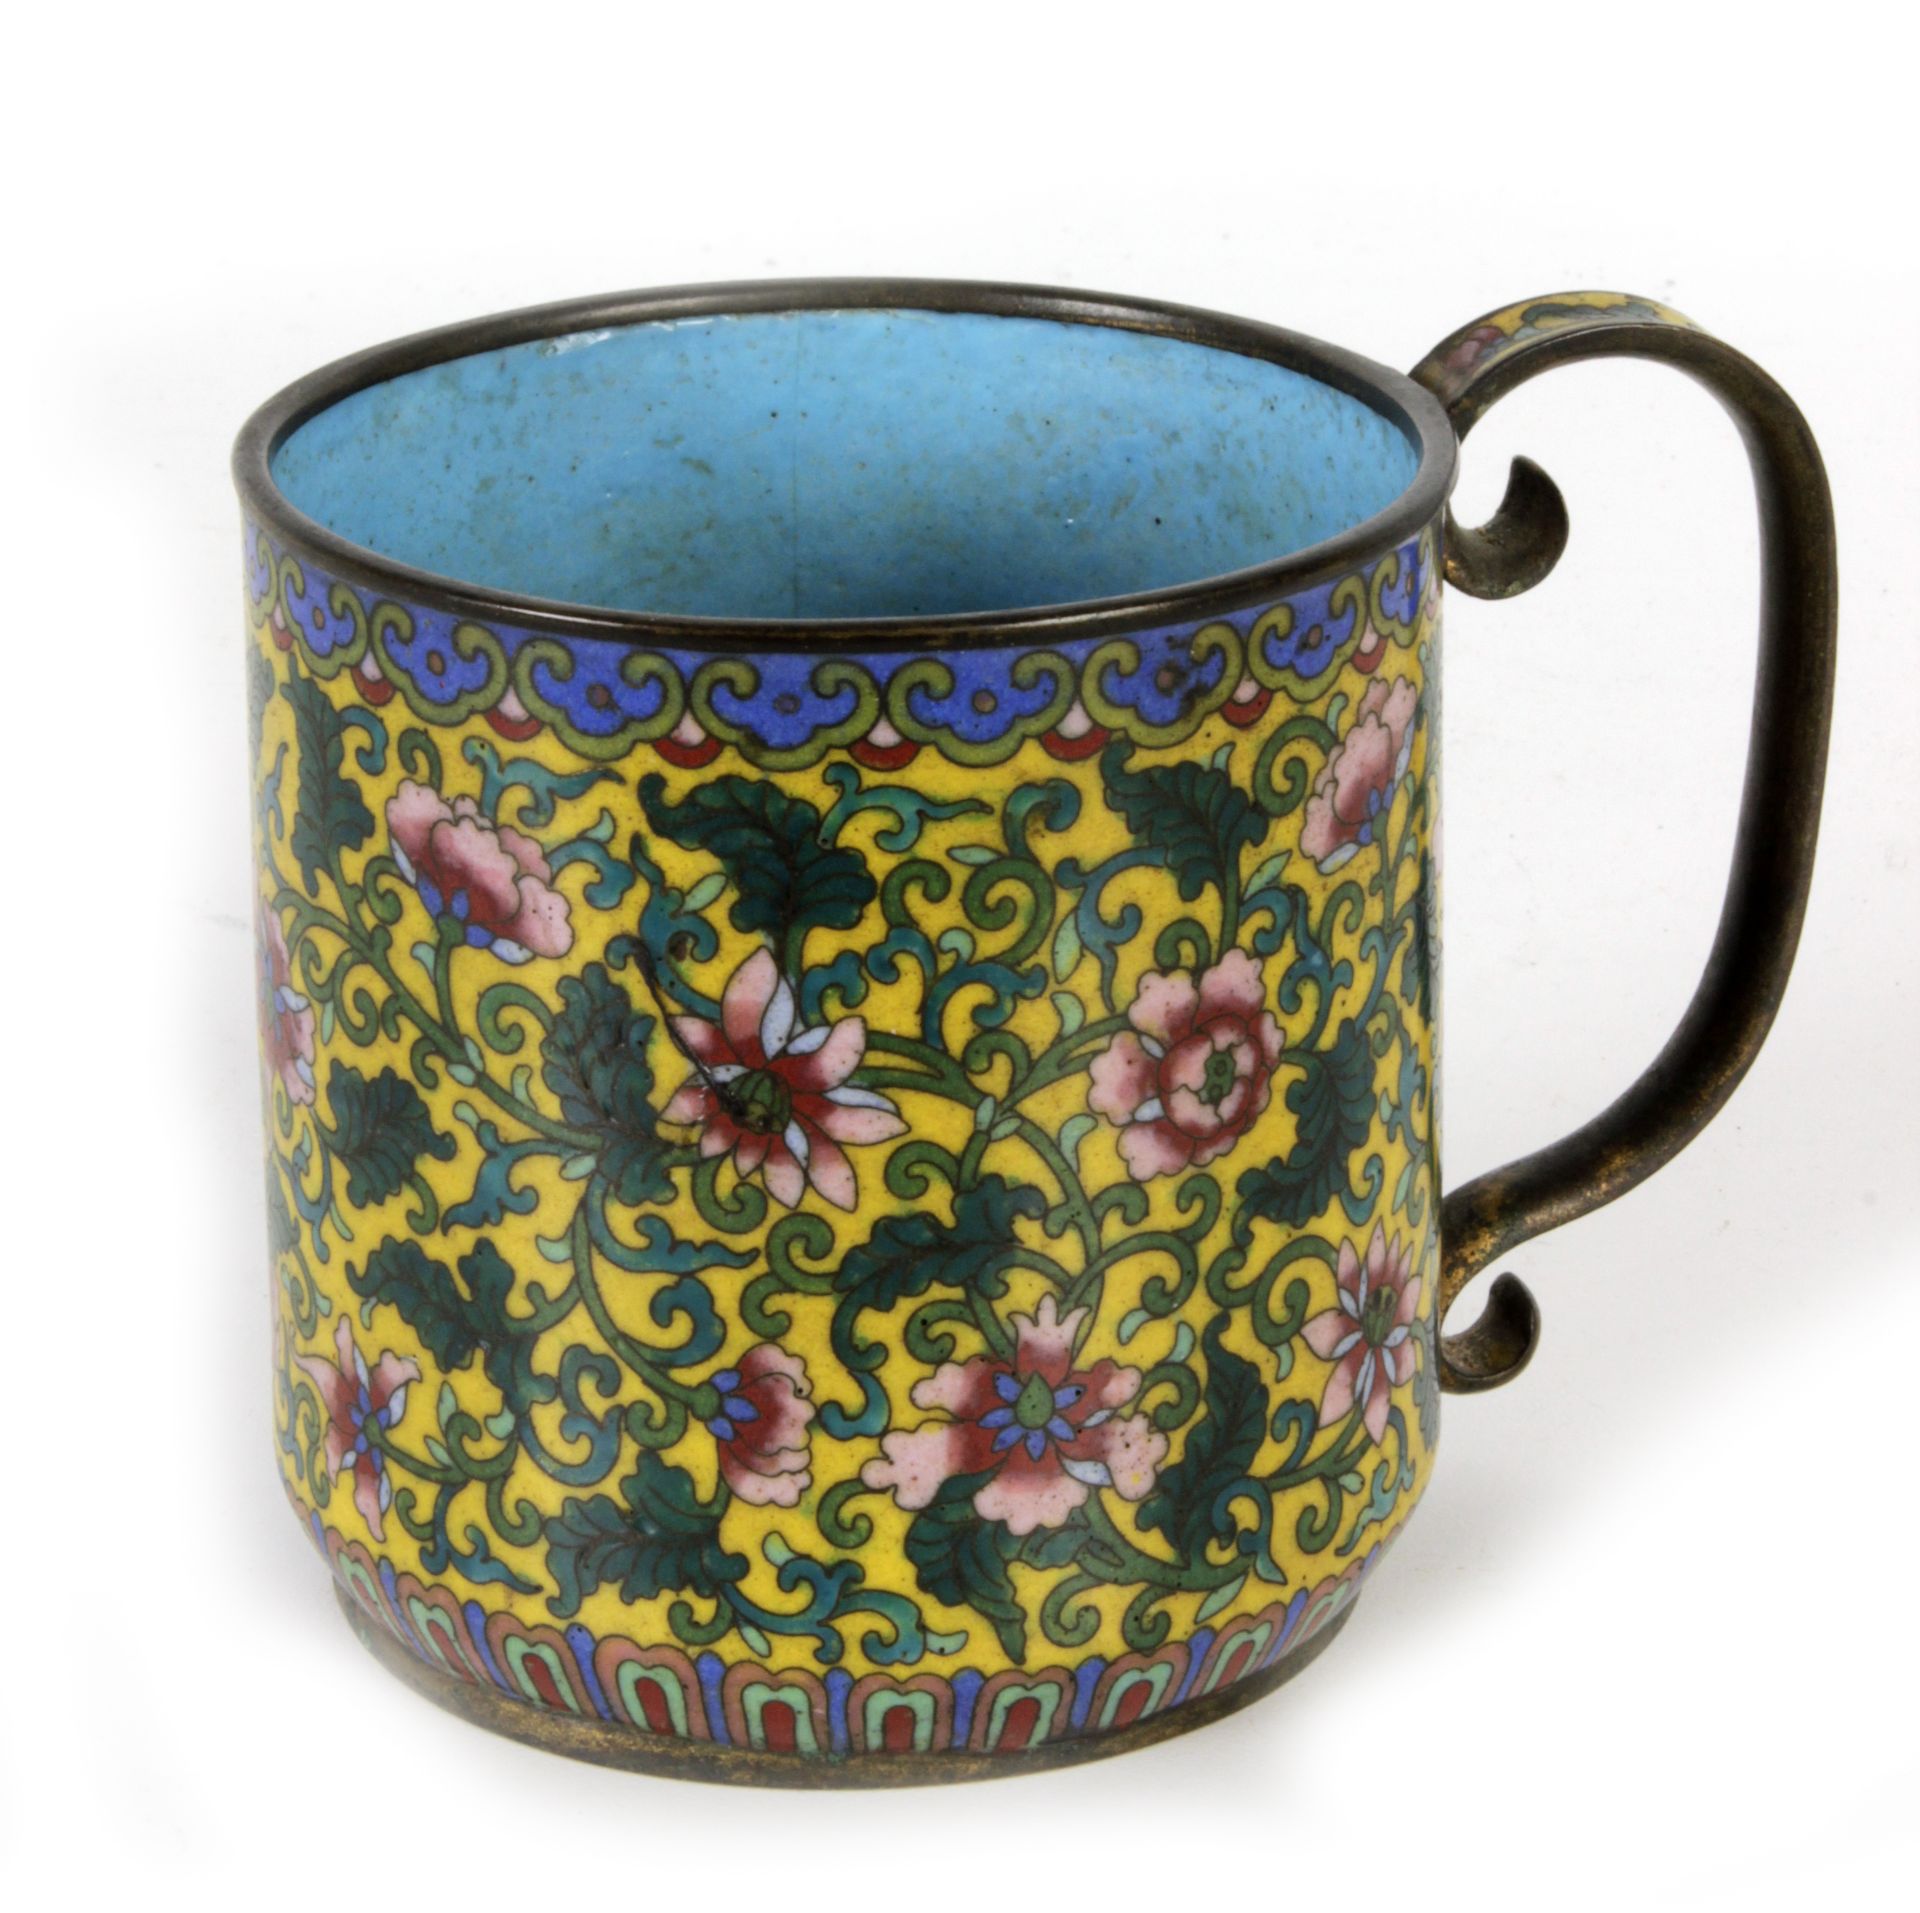 A first half of 20th century Chinese cup in copper with cloisonné enamel